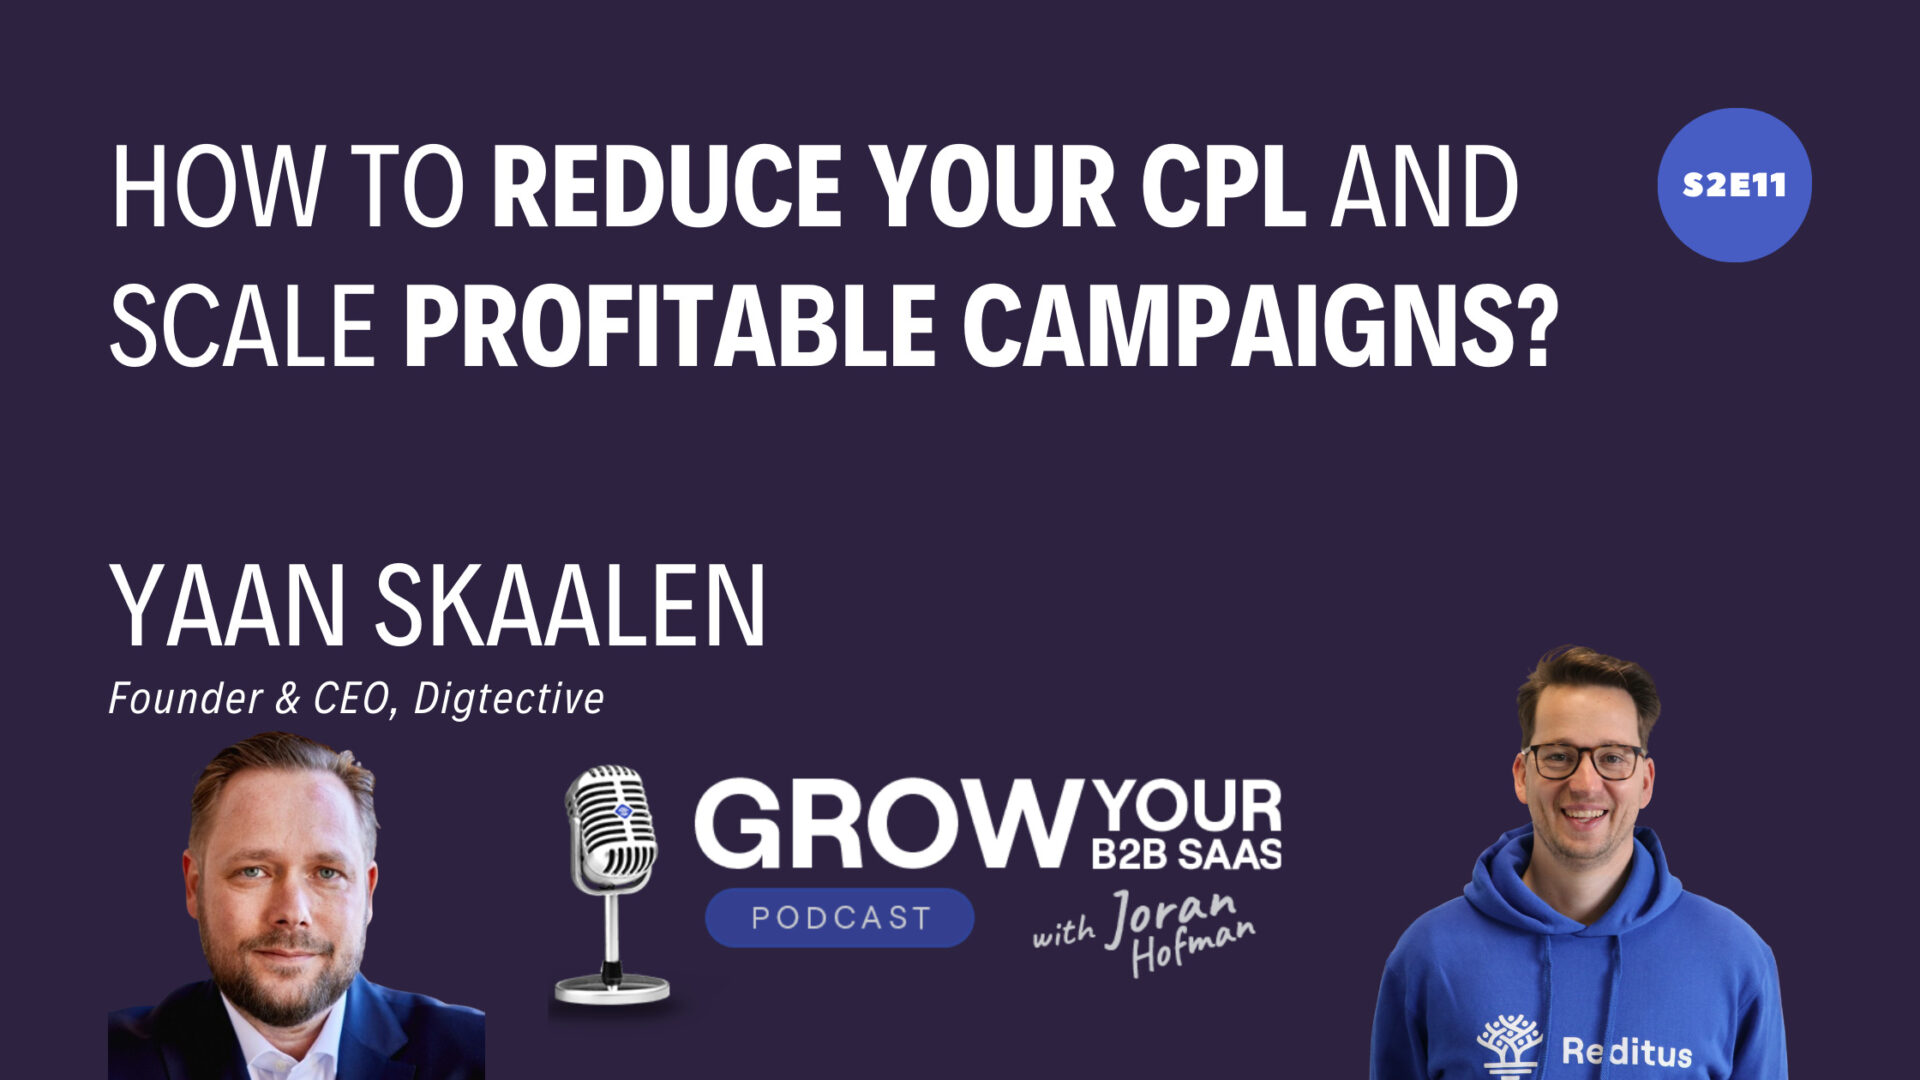 https://www.getreditus.com/podcast/s2e11-how-to-reduce-your-cpl-and-scale-profitable-campaigns-with-yann-skaalen/